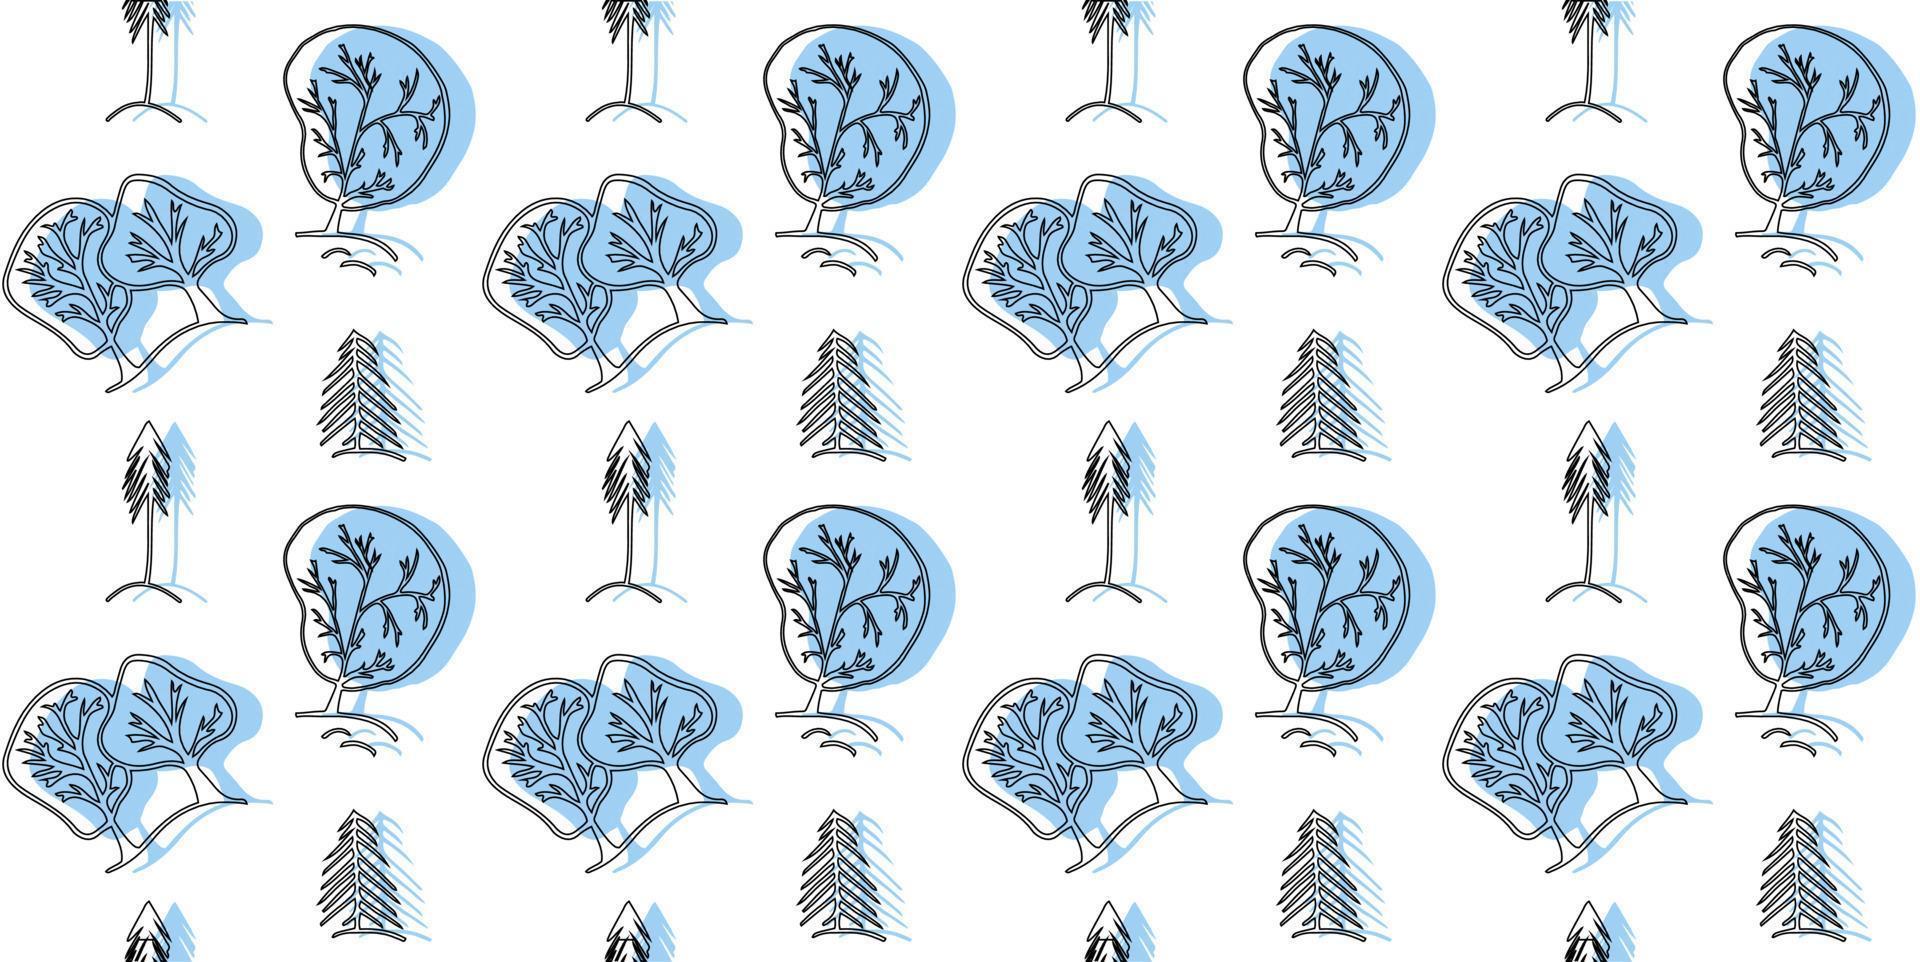 Winter Christmas background. Seamless Pattern with trees and pine with blue spots. Vector illustration.